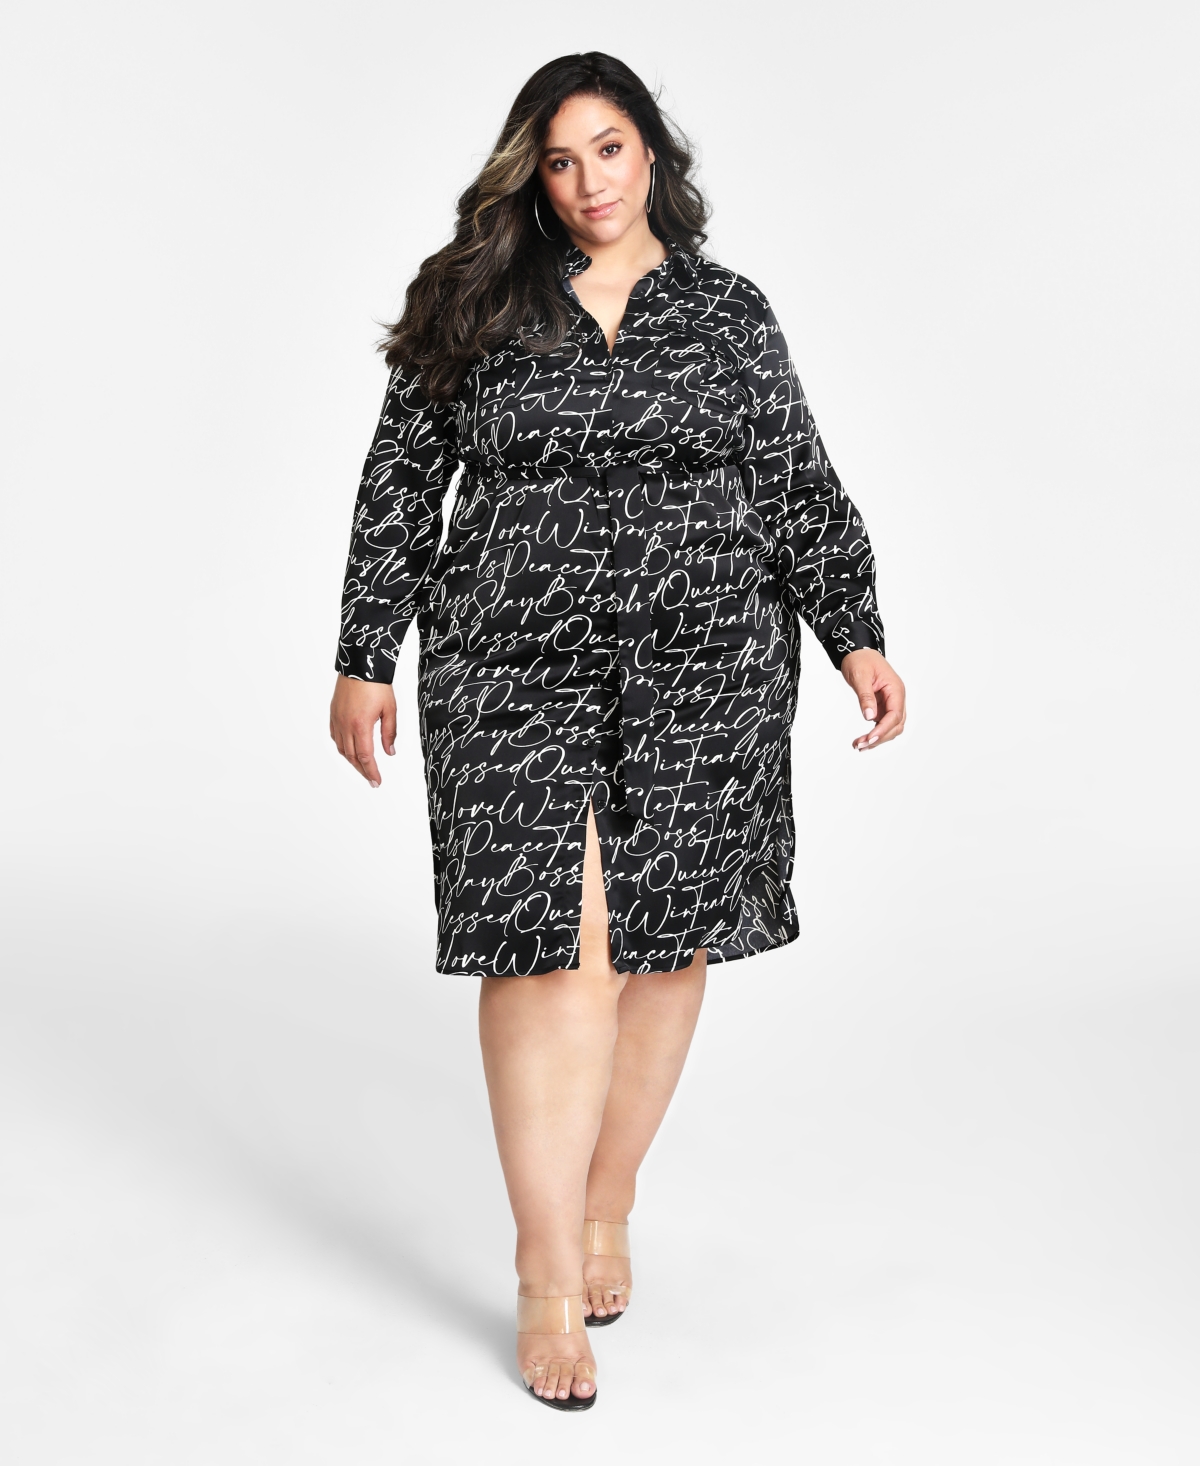 Nina Parker Trendy Plus Size Bodycon Ruched Dress - Macy's